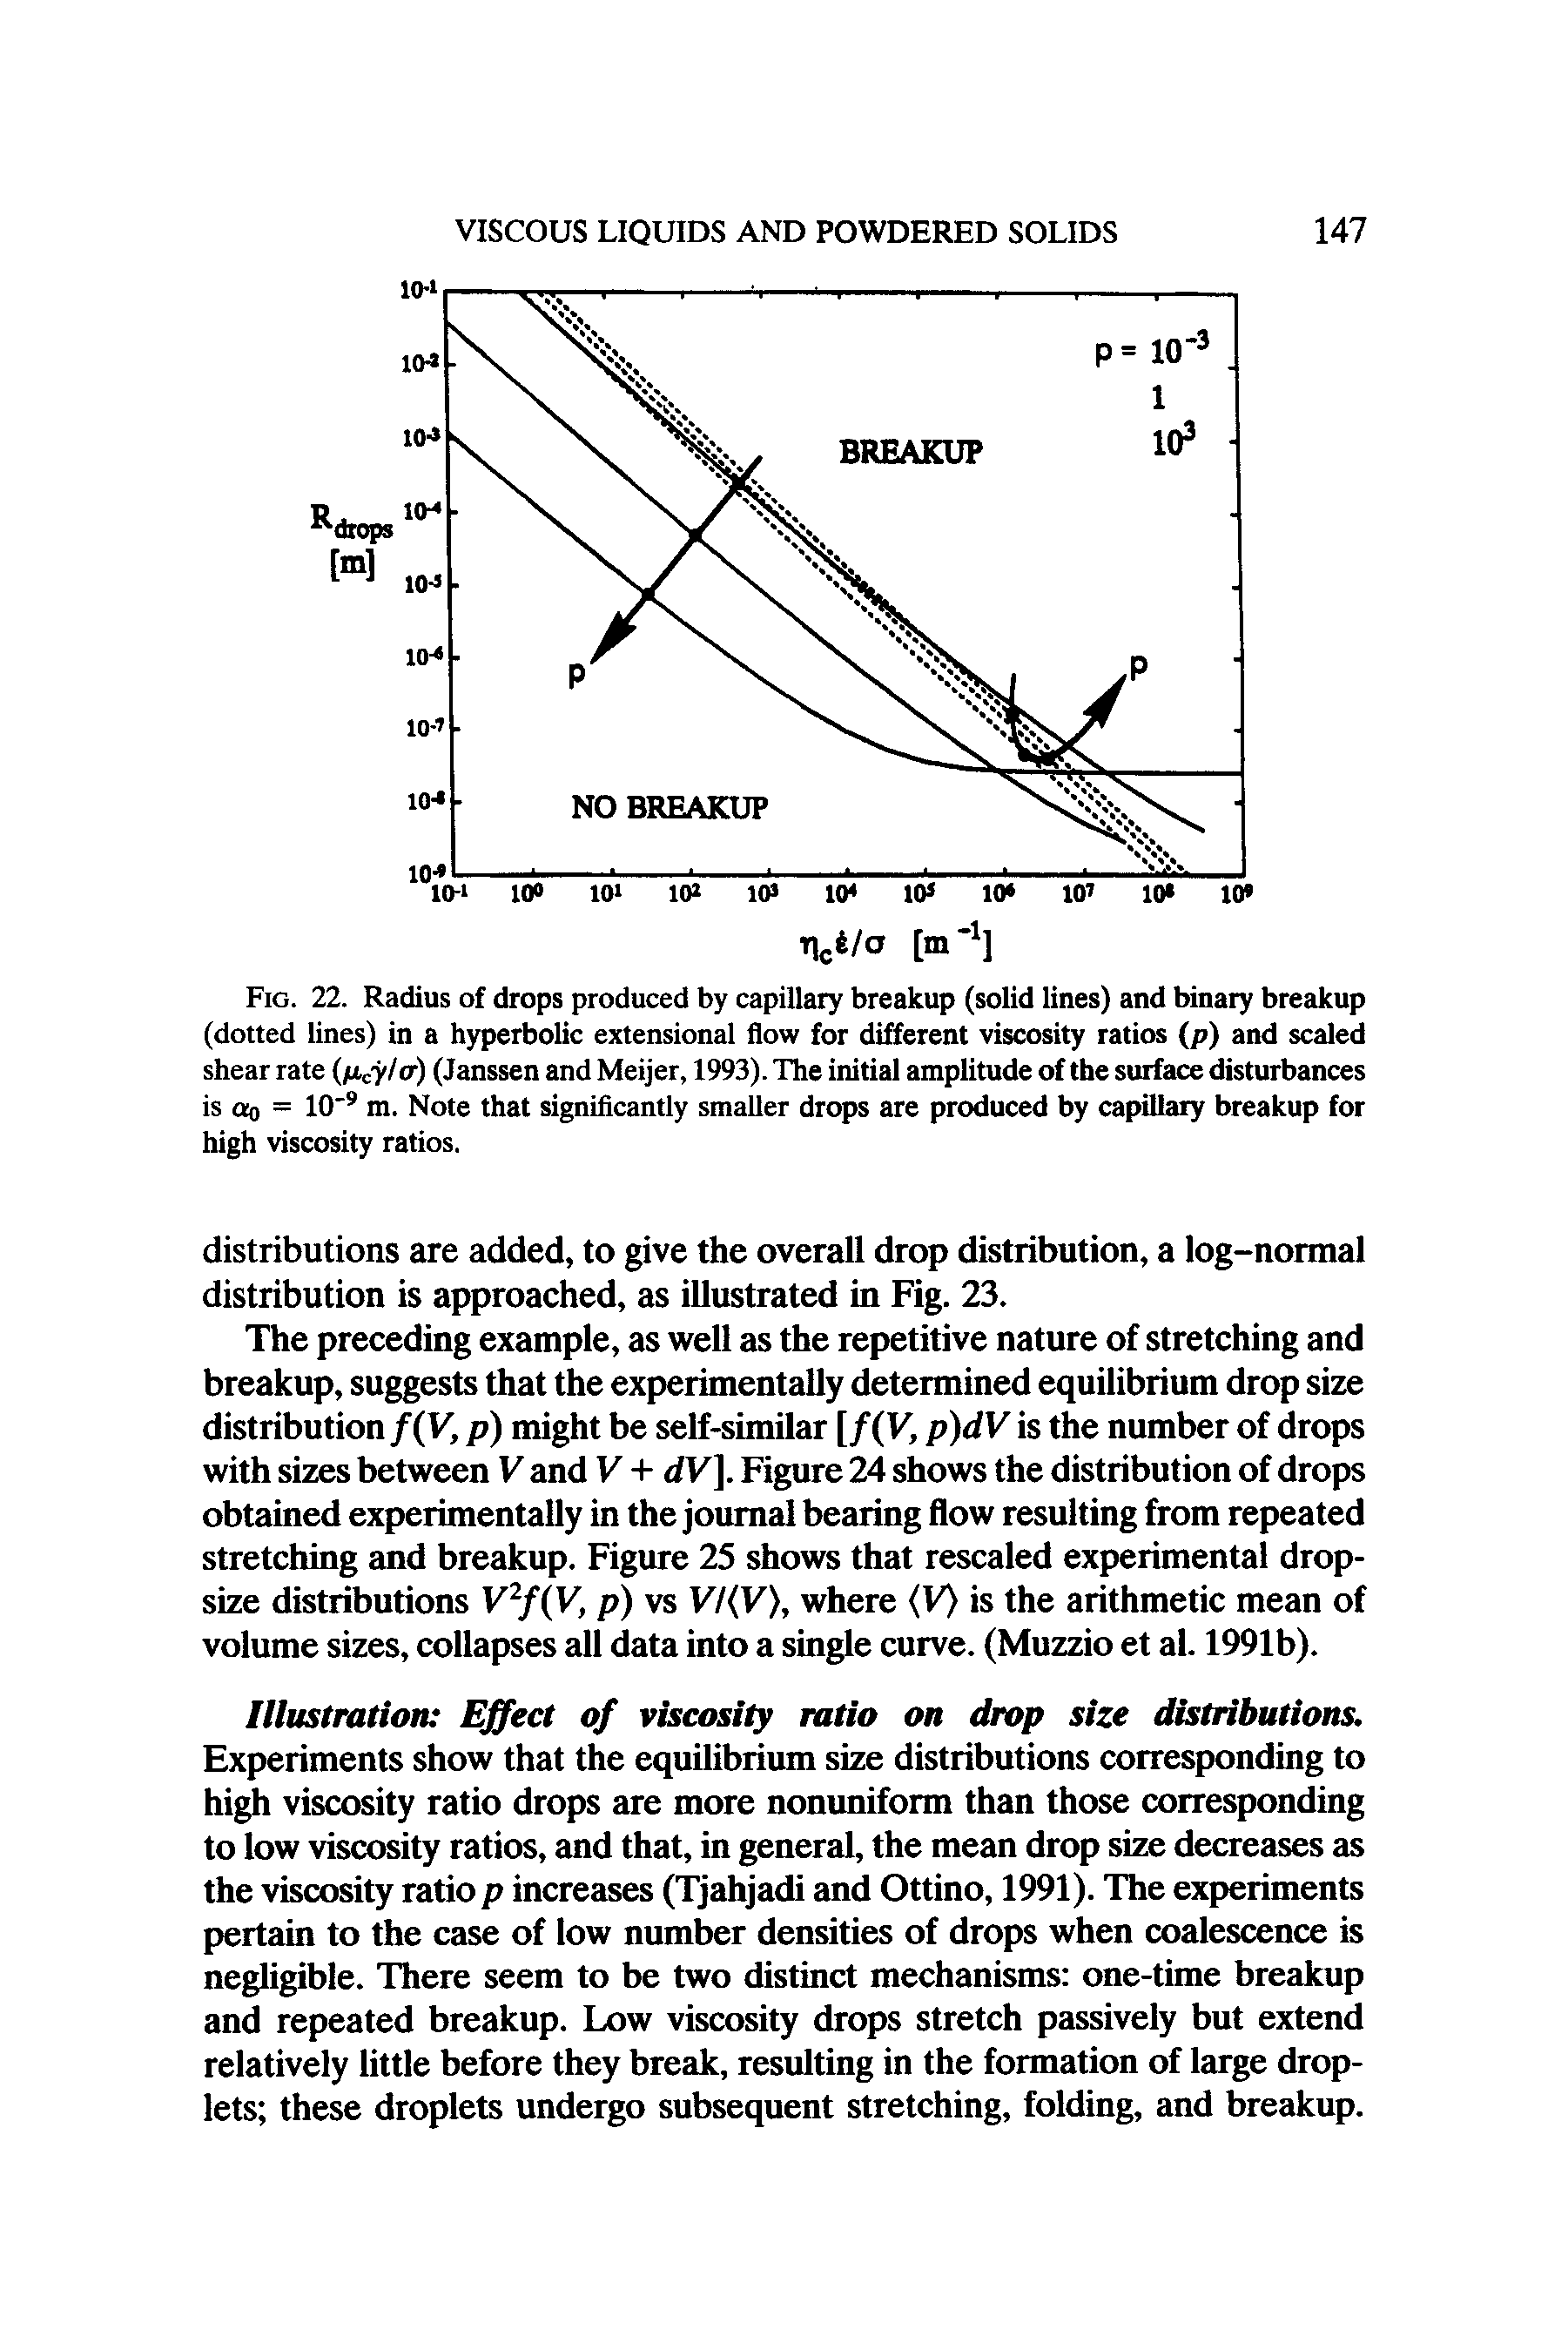 Fig. 22. Radius of drops produced by capillary breakup (solid lines) and binary breakup (dotted lines) in a hyperbolic extensional flow for different viscosity ratios (p) and scaled shear rate (p,cylo) (Janssen and Meijer, 1993). The initial amplitude of the surface disturbances is ao = 10 9 m. Note that significantly smaller drops are produced by capillary breakup for high viscosity ratios.